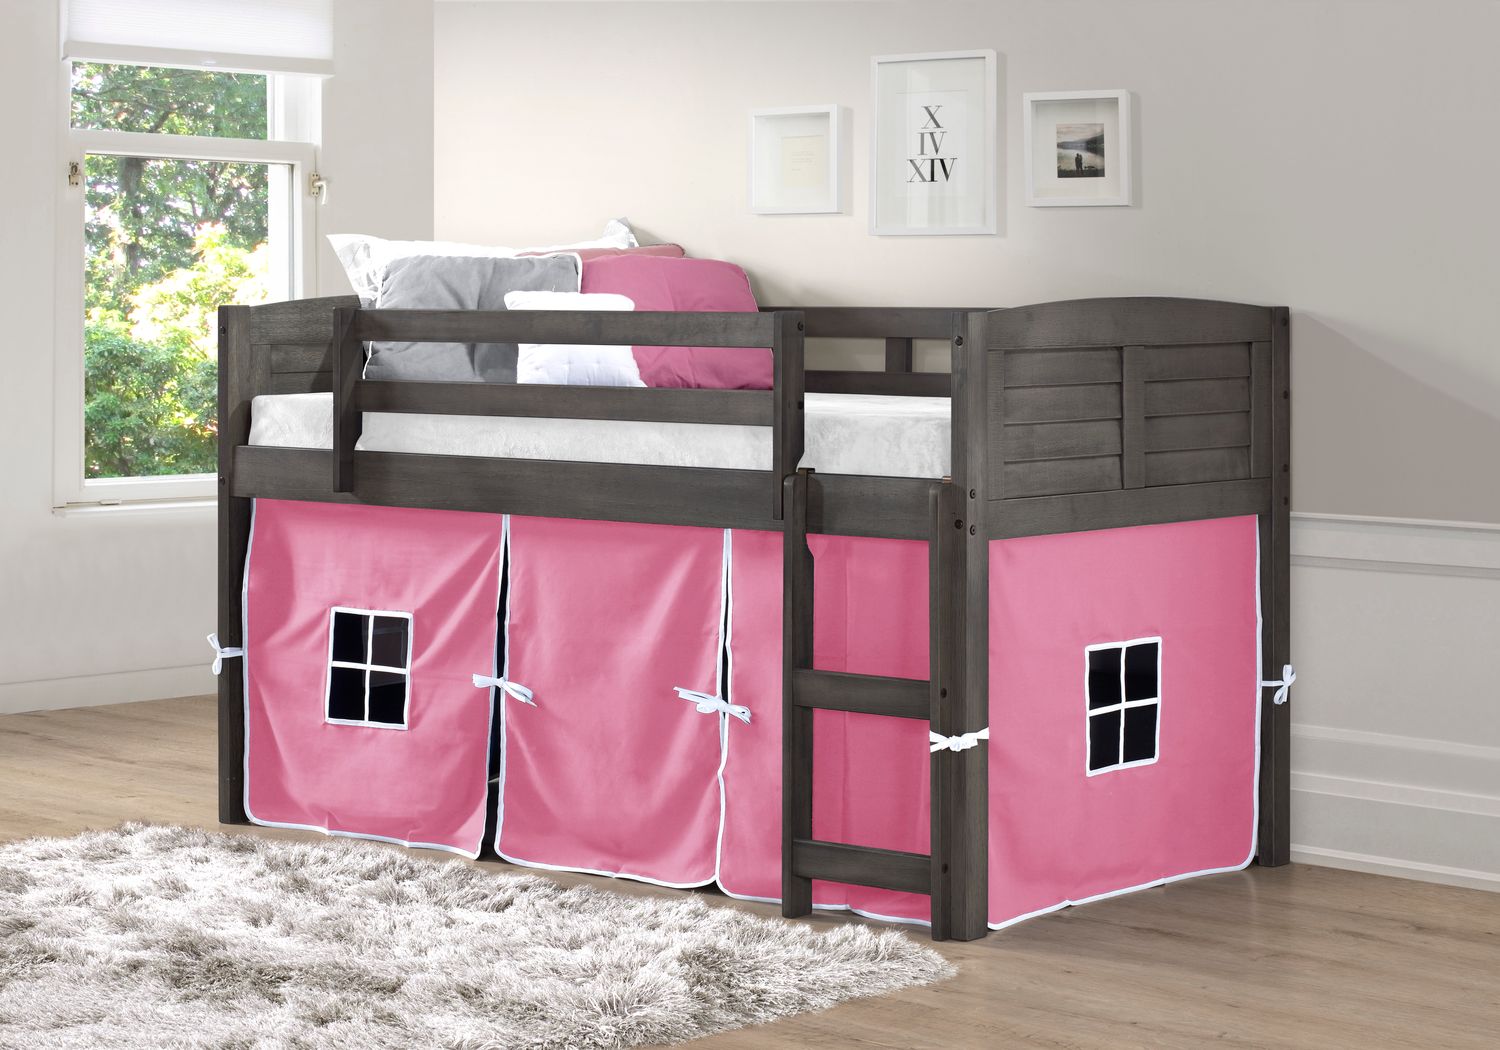 Bunk Beds For Kids, Futon Bunk Bed Rooms To Go